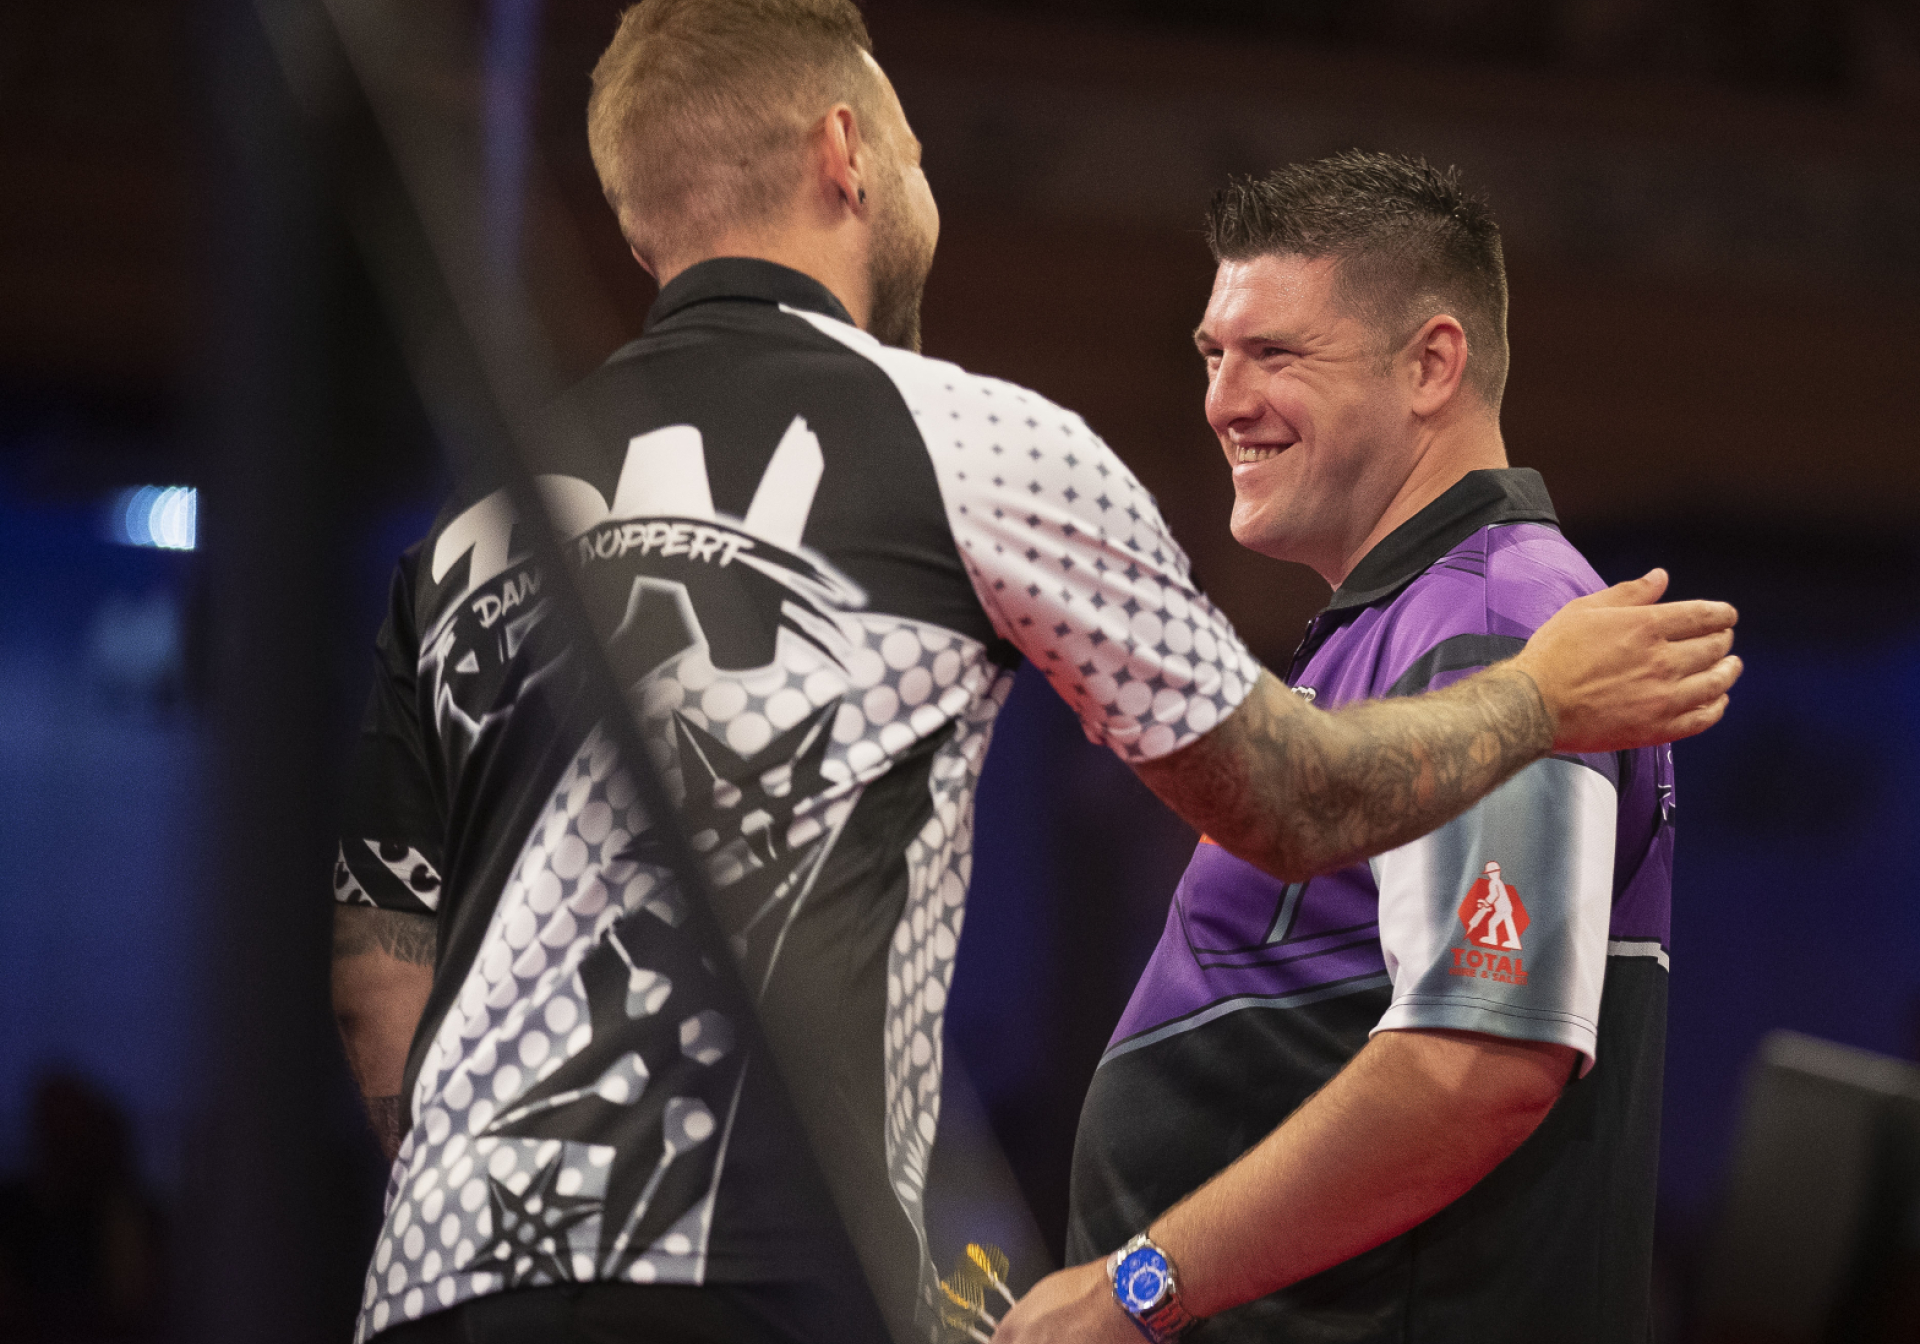 Danny Noppert and Daryl Gurney shake hands at the end of the match